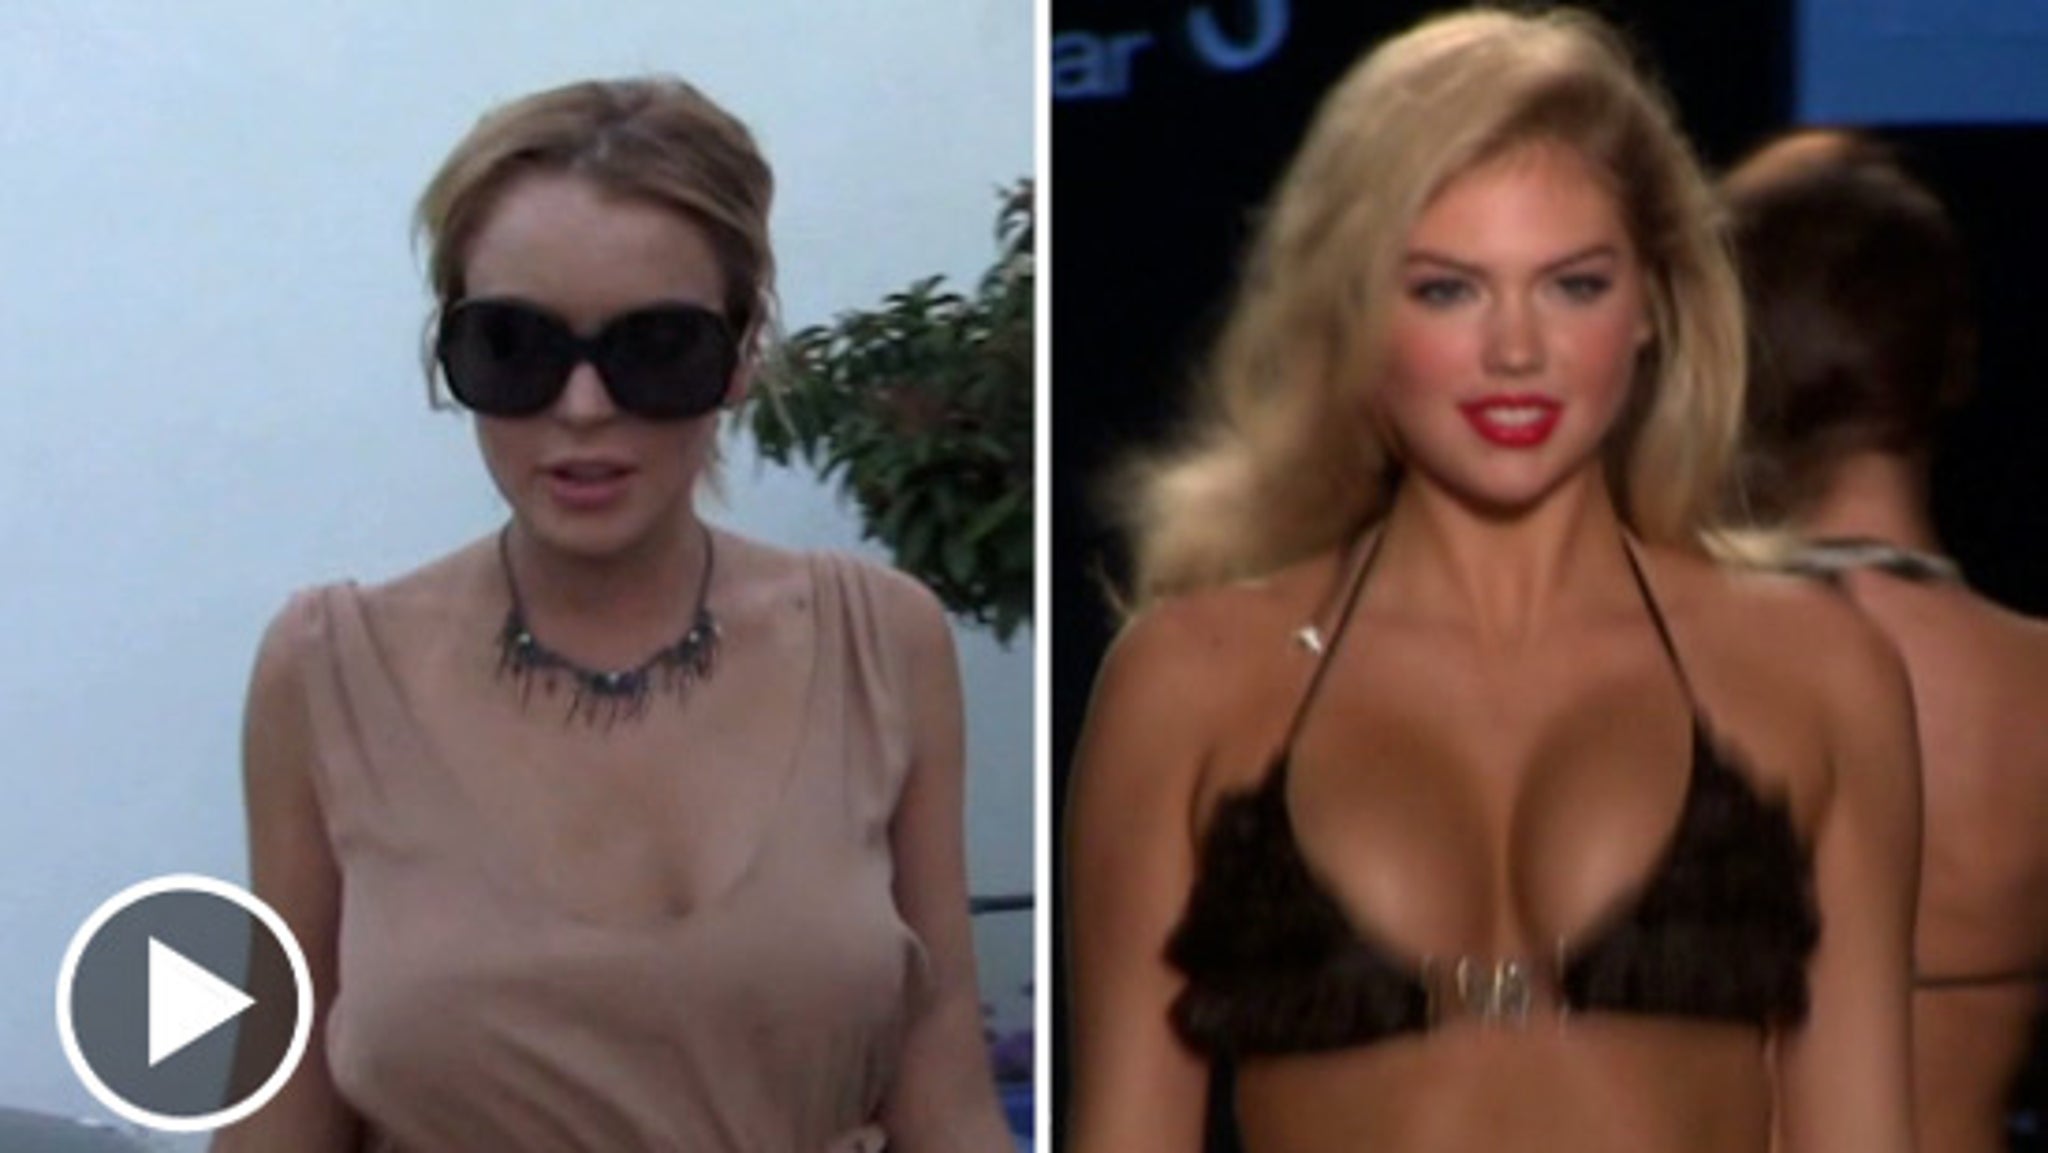 Lindsay Lohan vs. Kate Upton -- You Can't Look Away from Bouncy